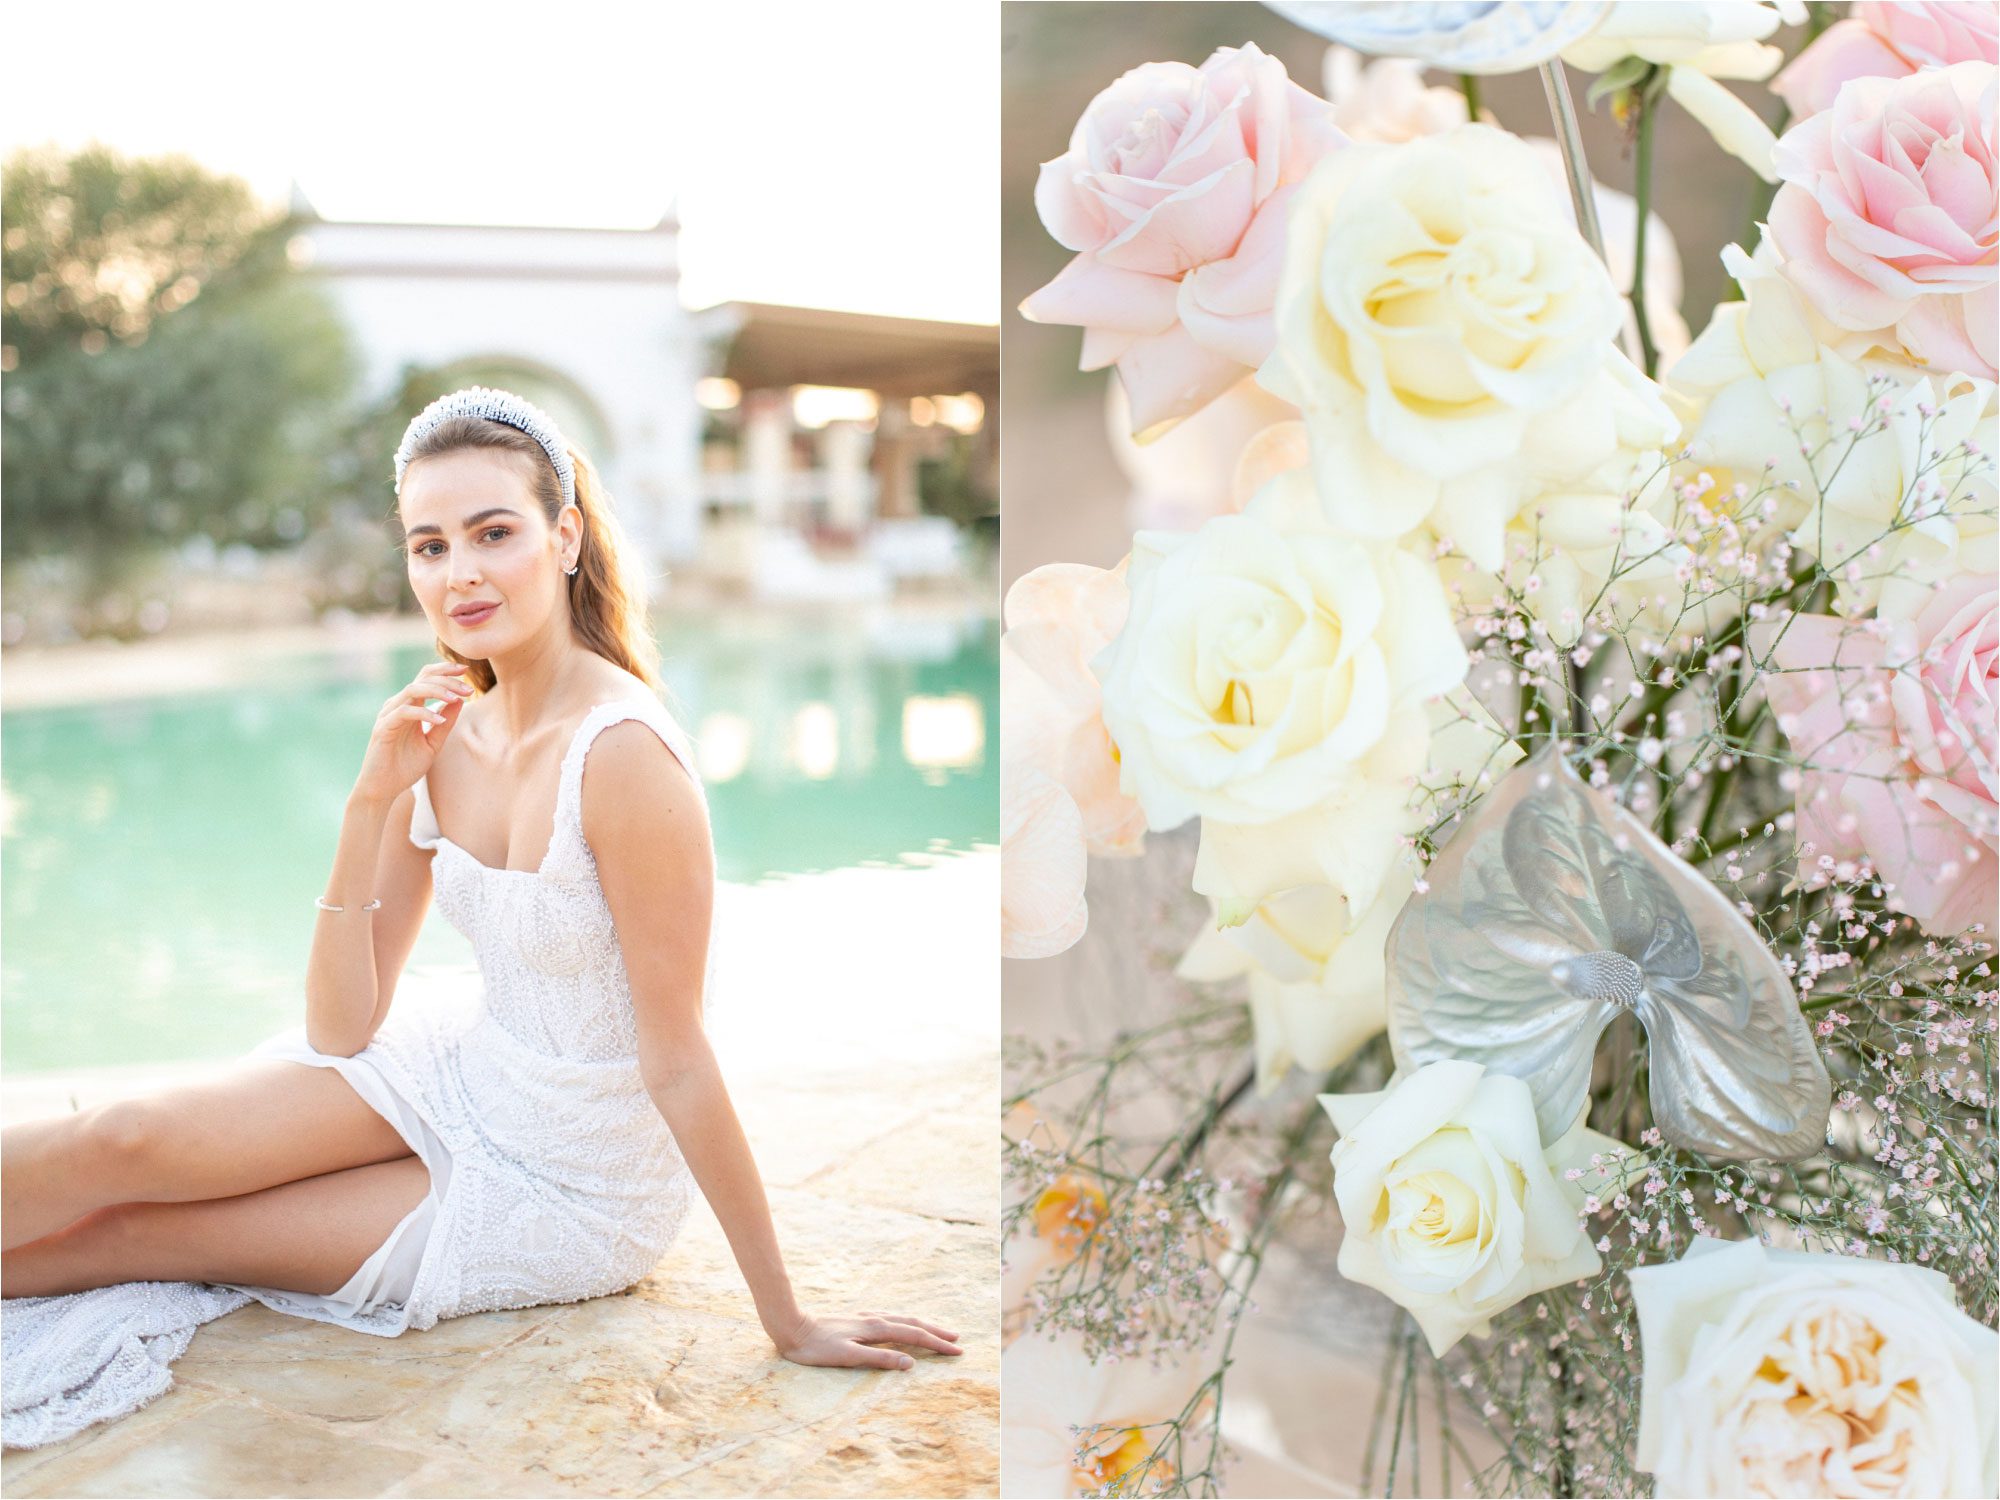 Wedding photographer in Puglia for stylish couples